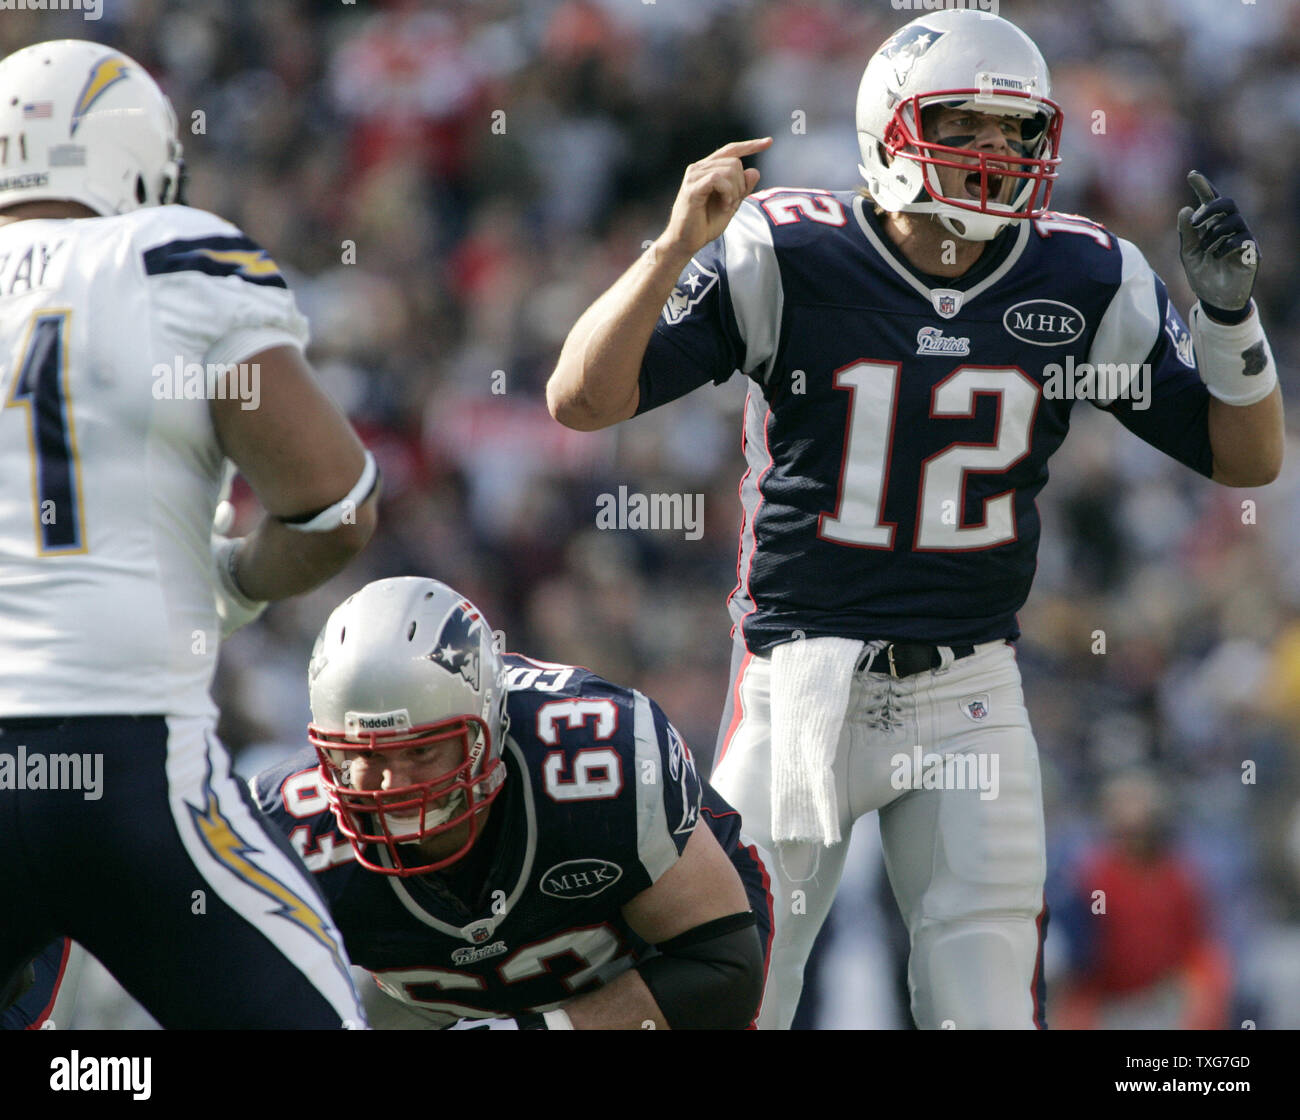 New England Patriots quarterback Tom Brady (12) calls an audible at the line in the first quarter against the San Diego Chargers at Gillette Stadium in Foxboro, Massachusetts on September 18, 2011.  The Patriots defeated the Chargers 35-21.   UPI/Matthew Healey Stock Photo